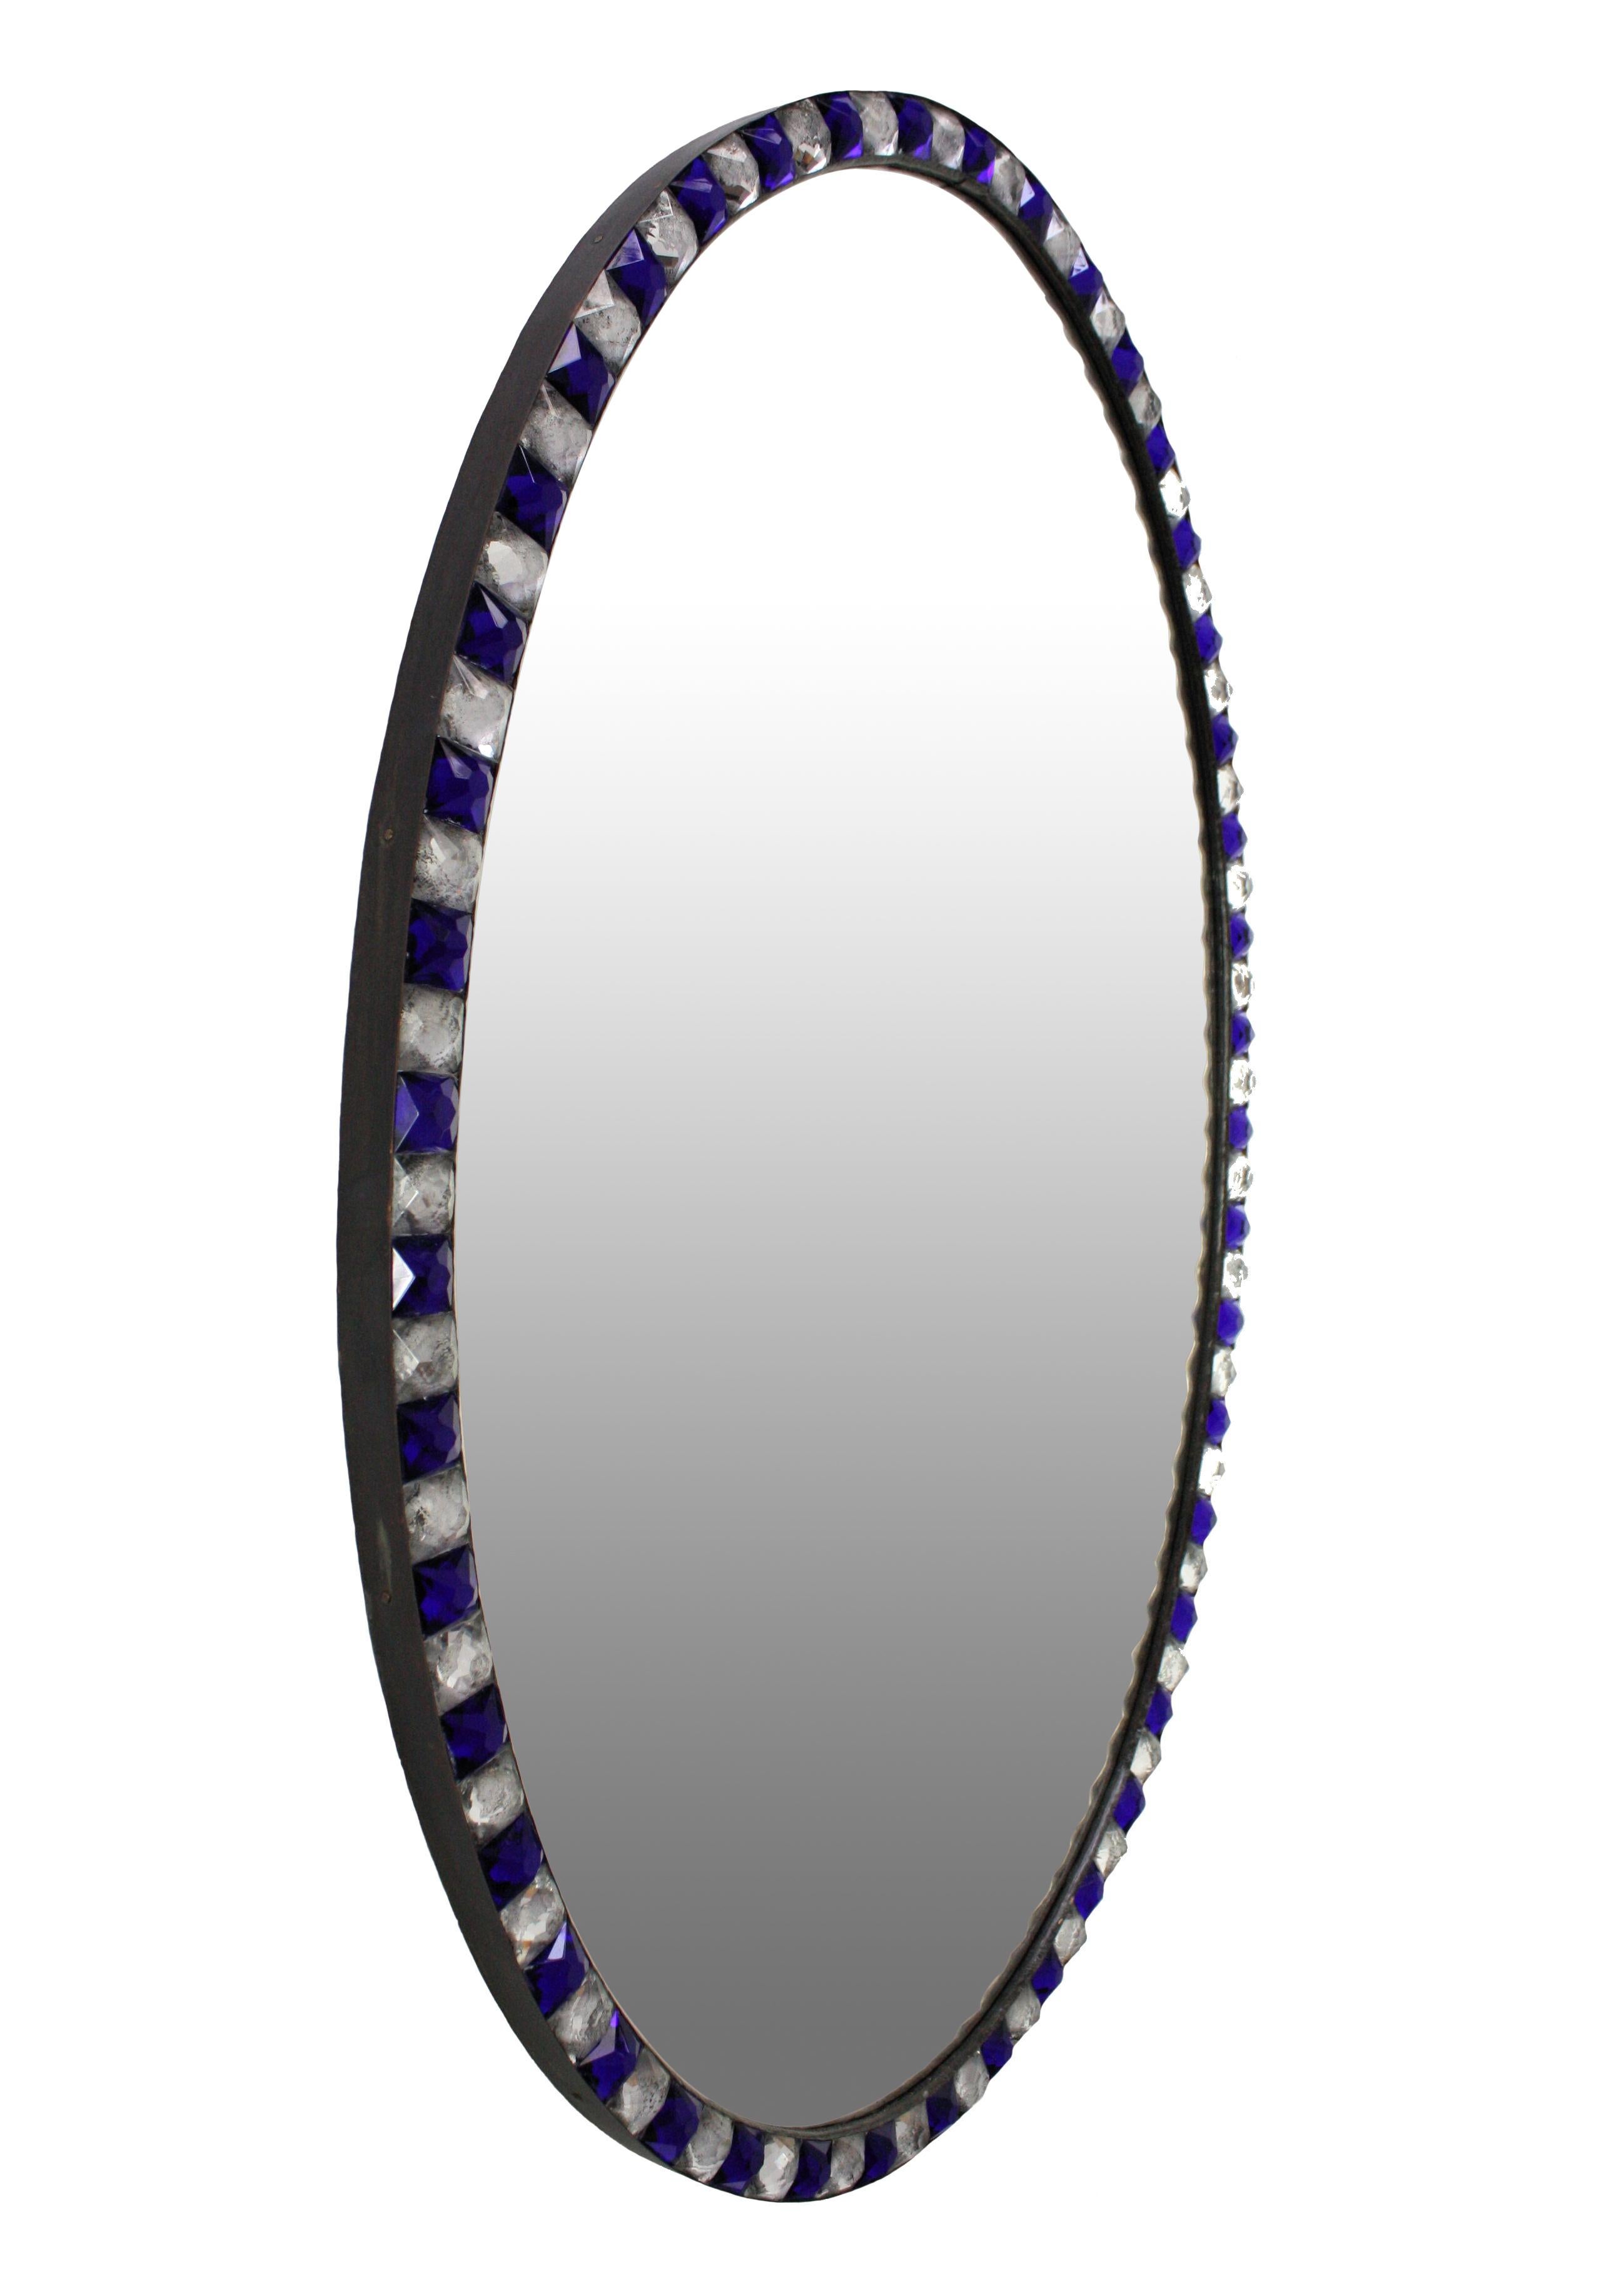 Pair of Stunning Irish Mirrors with Faceted Rock Crystal and Blue Glass Borders 1